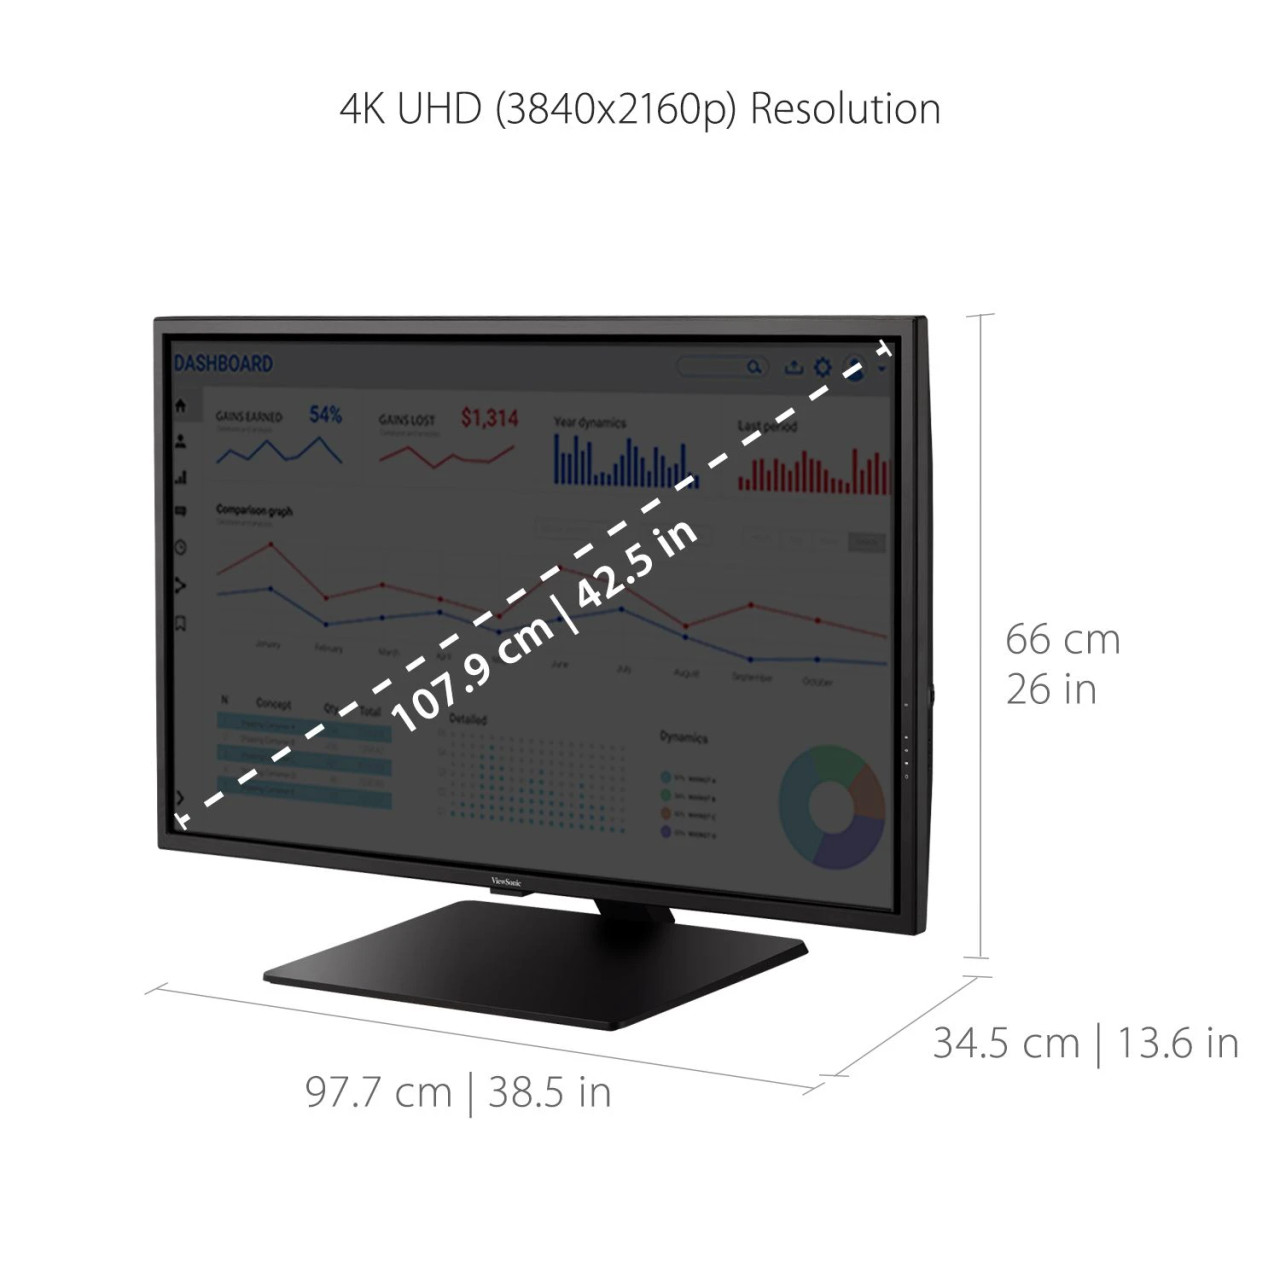 Viewsonic 43" 4K UHD Monitor with HDR10, HDMI and DisplayPort